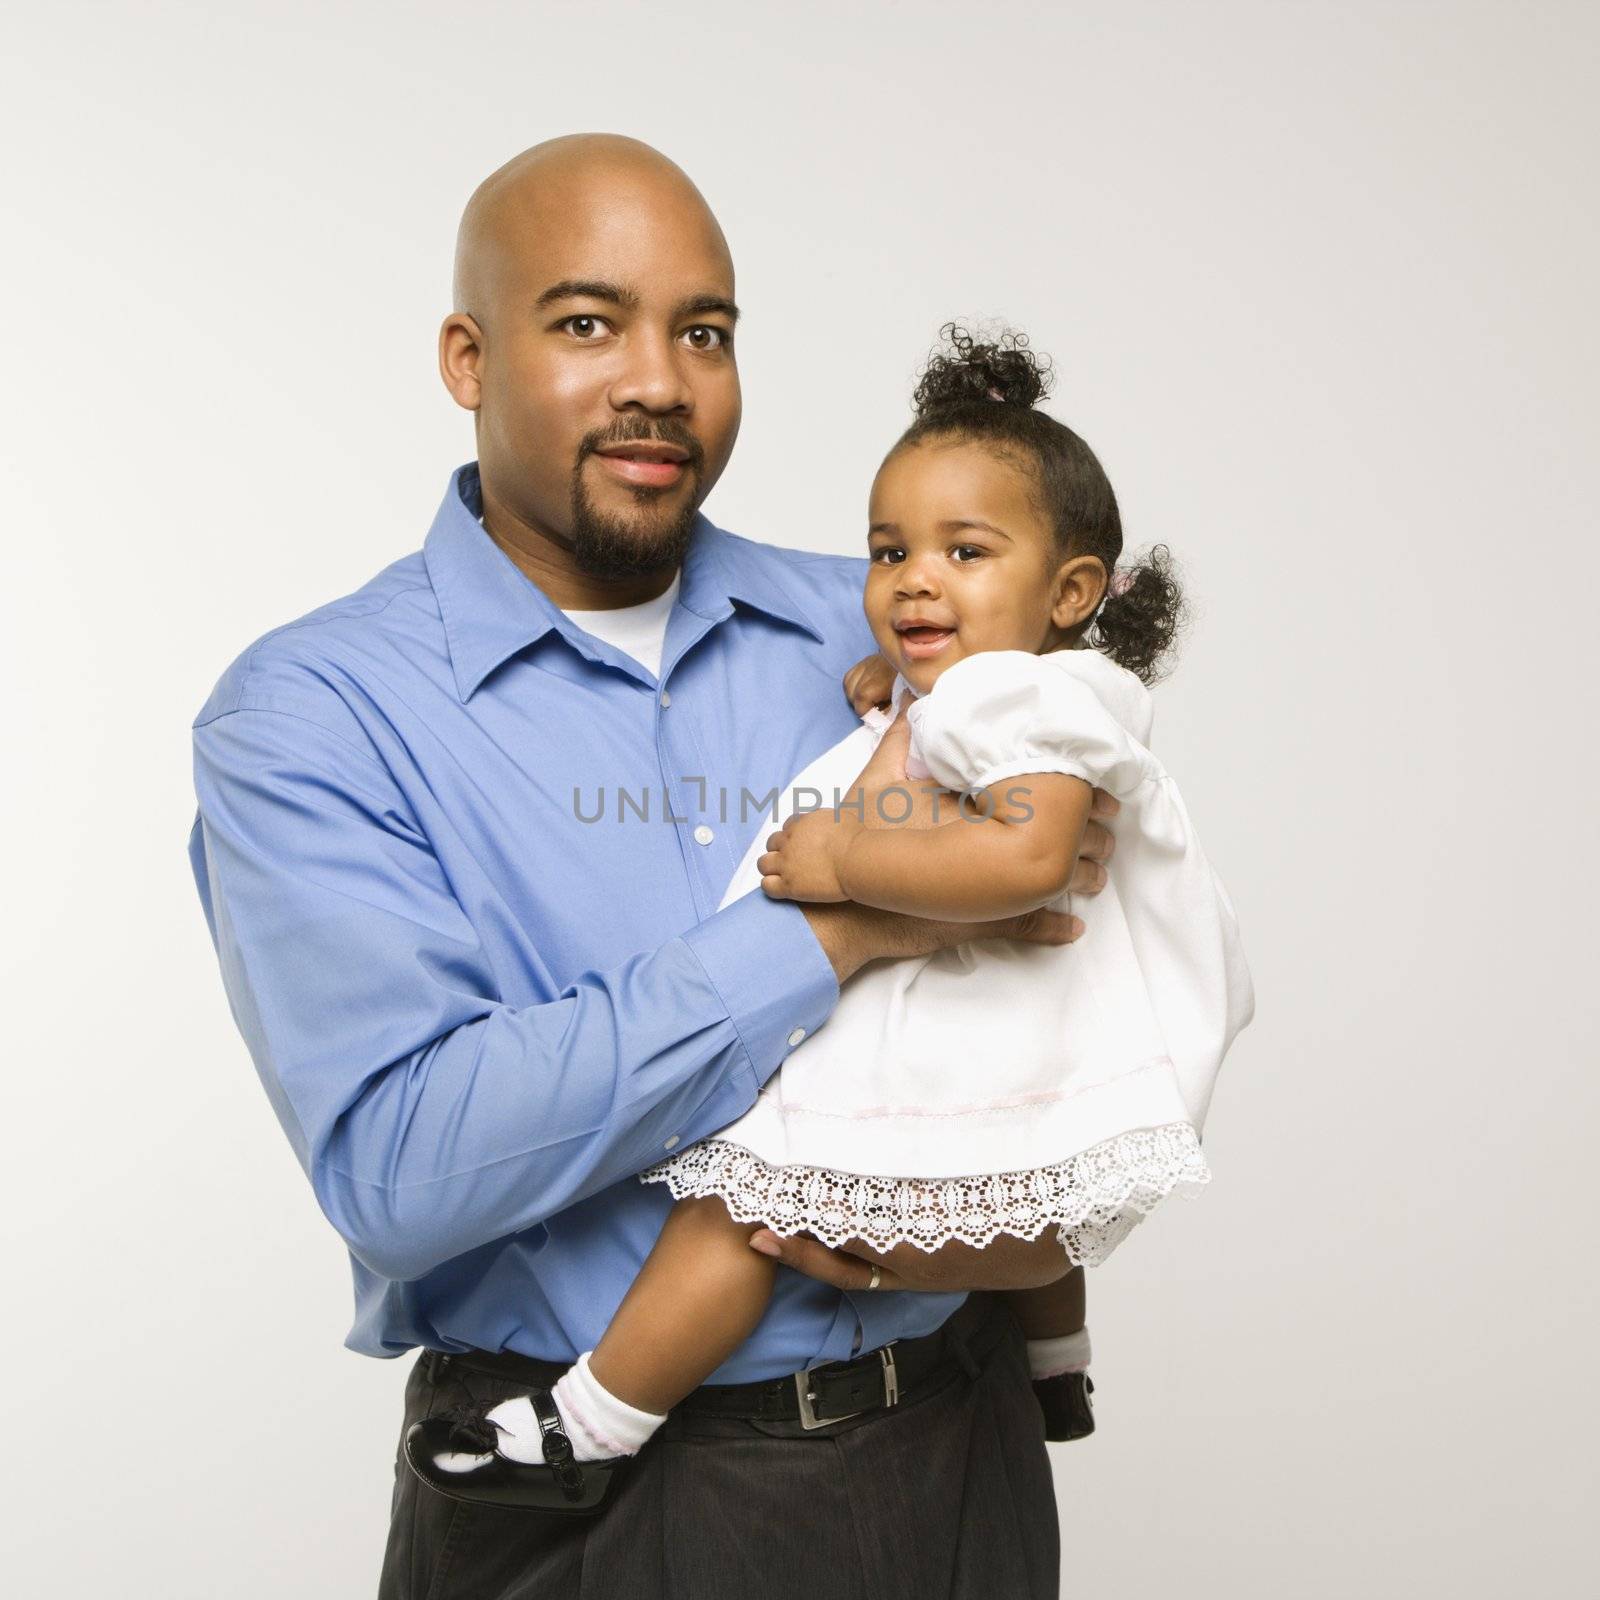 African American man holding infant girl standing against white background.